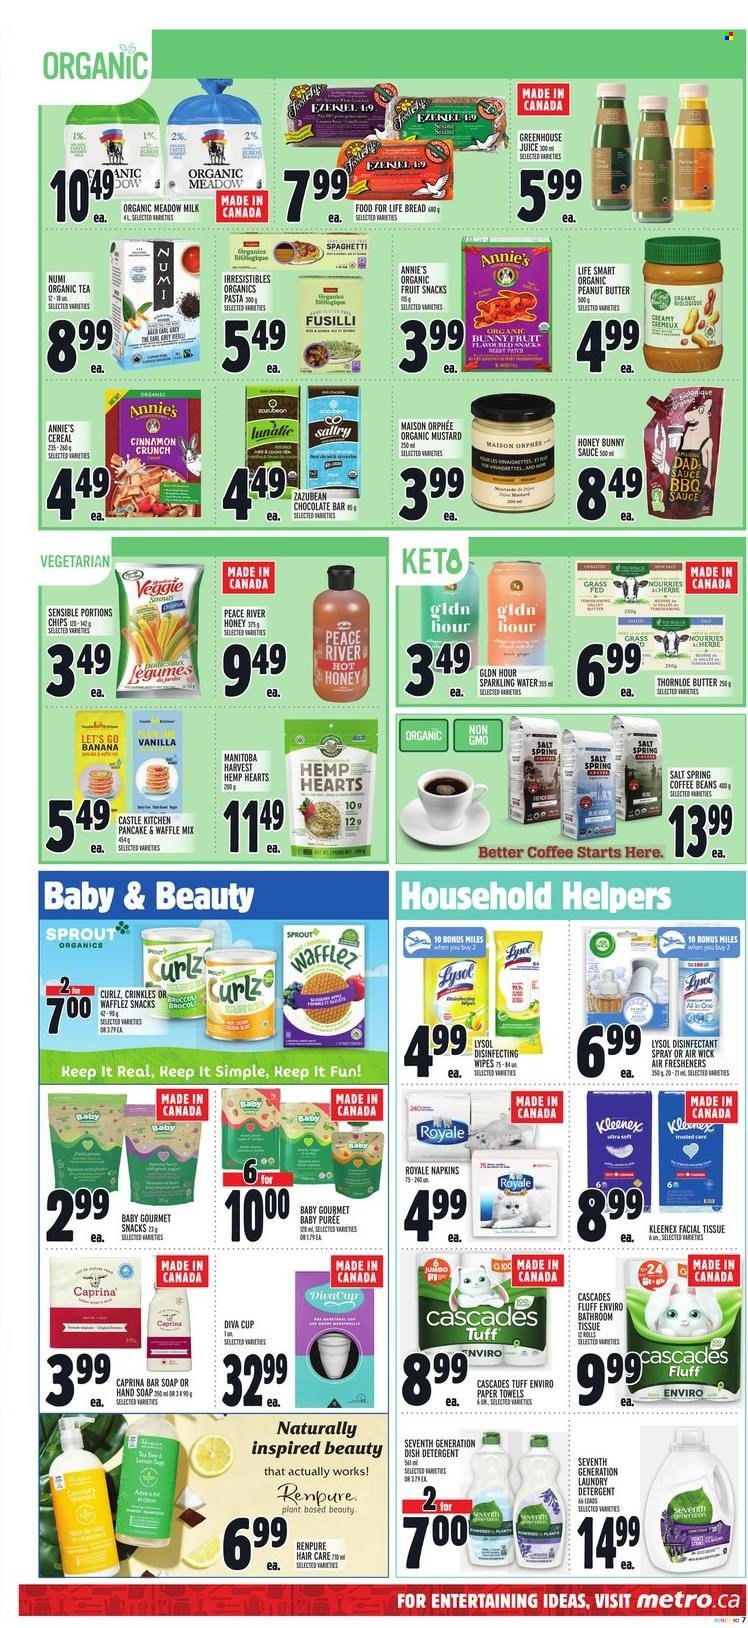 thumbnail - Metro Flyer - June 30, 2022 - July 06, 2022 - Sales products - spaghetti, pasta, sauce, pancakes, Annie's, milk, snack, chocolate bar, chips, cereals, cinnamon, BBQ sauce, mustard, honey, peanut butter, juice, sparkling water, tea, coffee beans, Castle, wipes, napkins, Kleenex, tissues, kitchen towels, paper towels, Lysol, laundry detergent, hand soap, soap bar, soap, antibacterial spray, pipe, cup, air freshener, Air Wick, detergent, desinfection. Page 12.